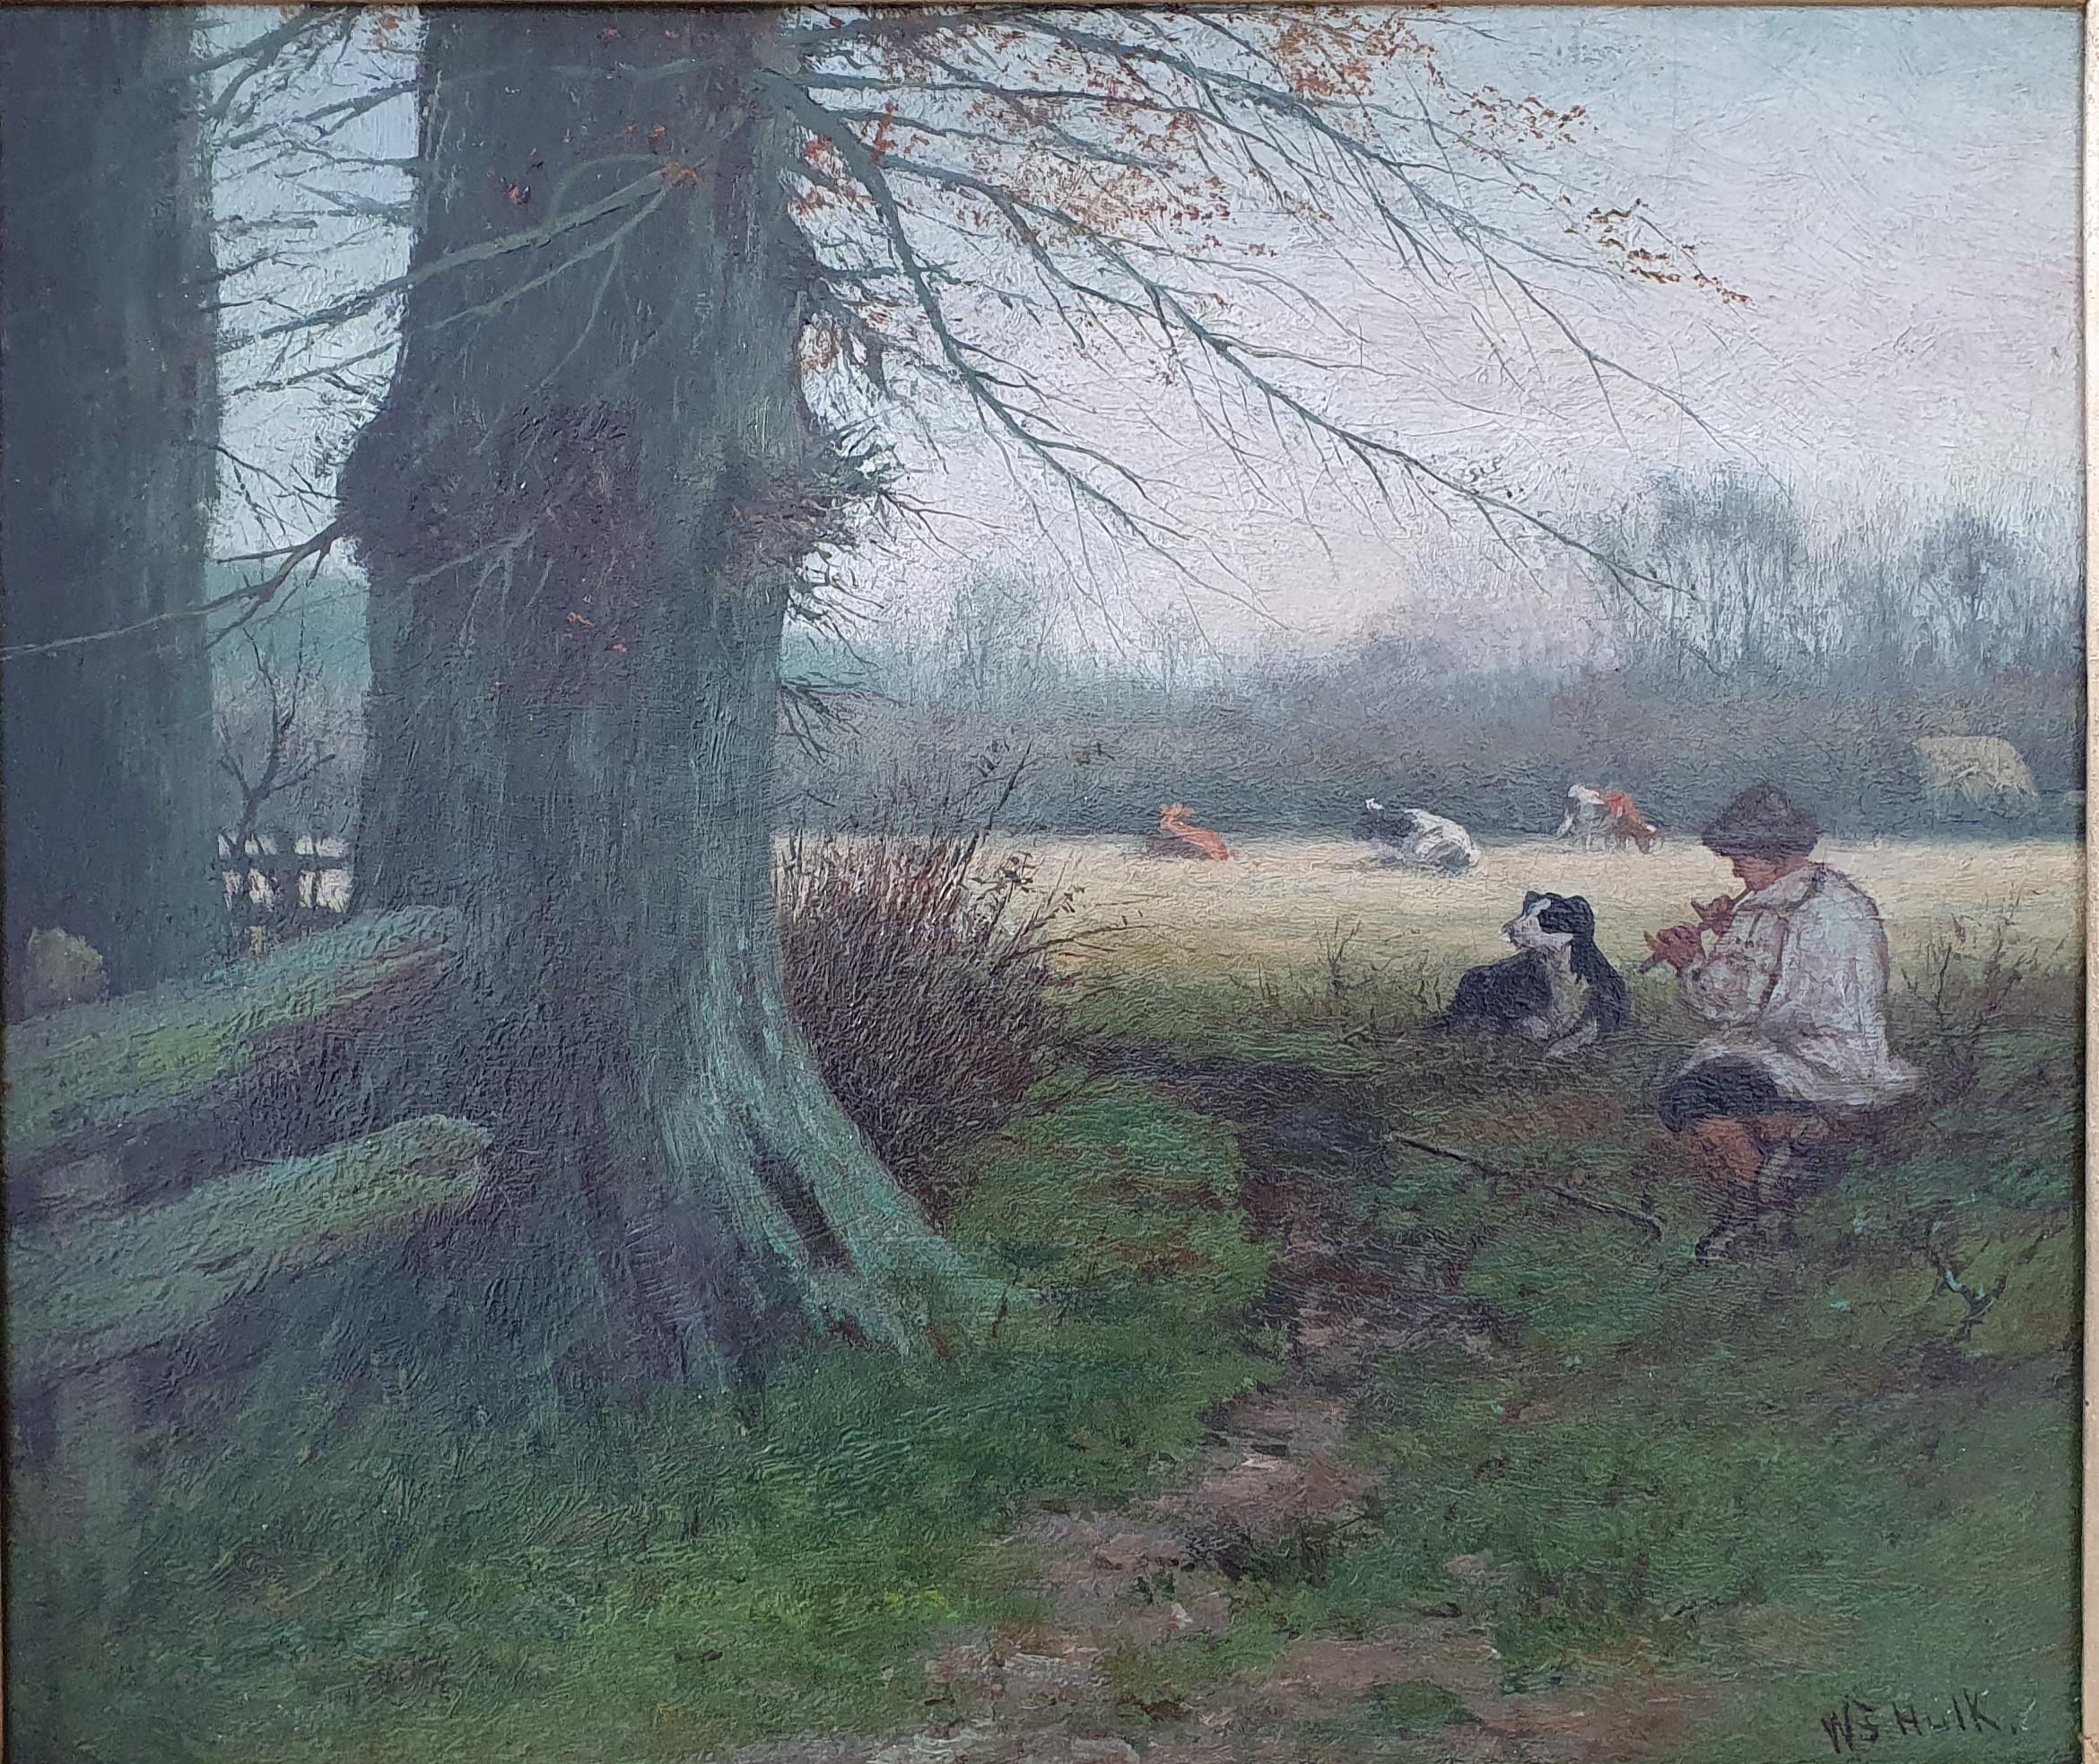 A lovely landscape painting by William Frederick Hulk ( Amsterdam 1852- London 1922) . Depicted is a herdsboy playing the flute accompanied by his dog sitting near a huge beech tree at dawn. In the distance a meadow with cows. William Frederick